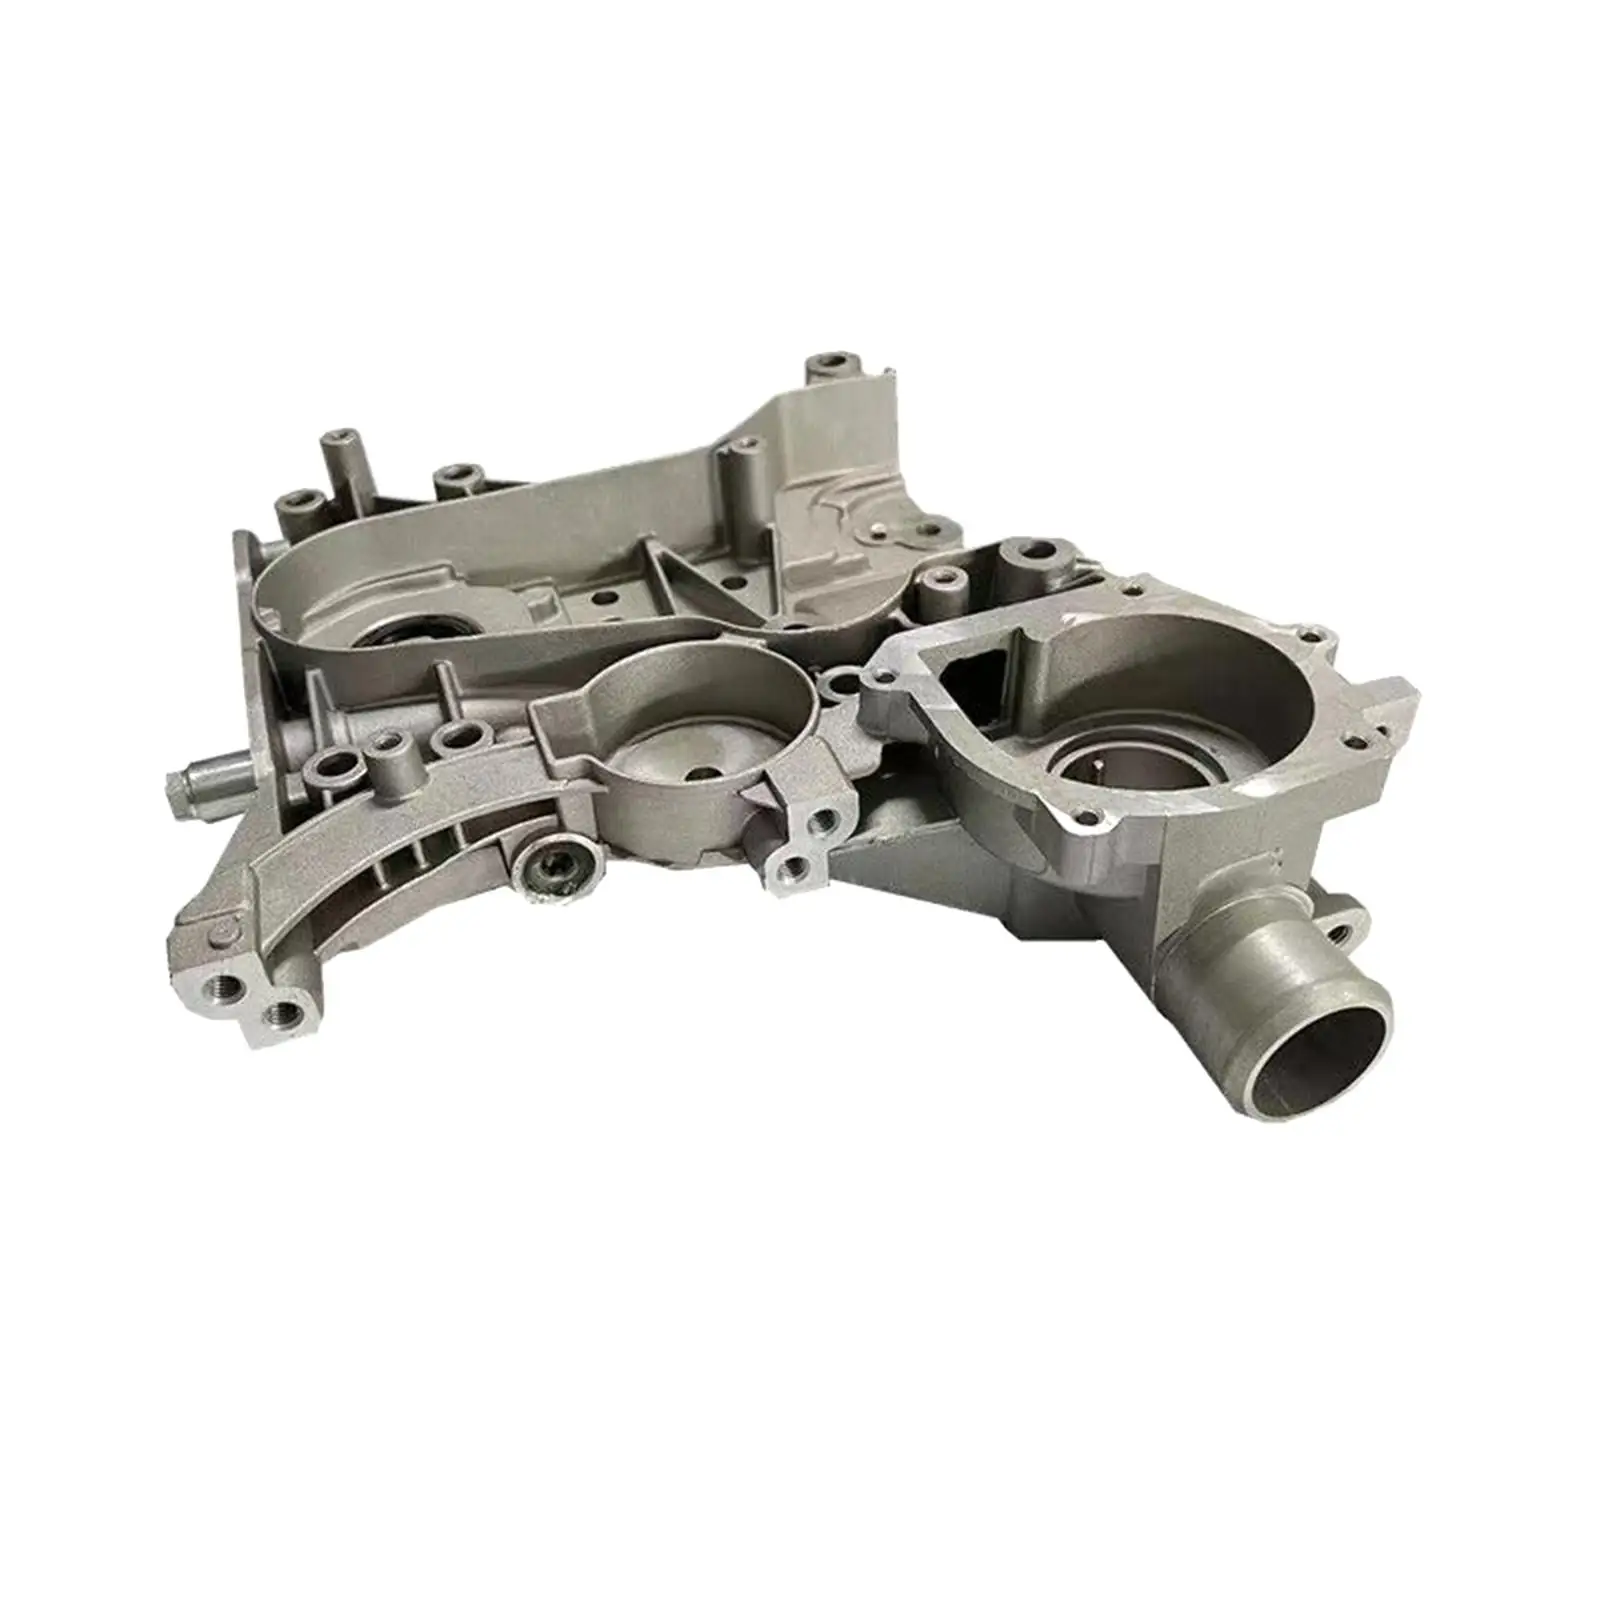 Timing Chain Oil Pump Cover 25195117 55556427 Direct Replacement for Insignia Zafira Stable Performance Easily Install